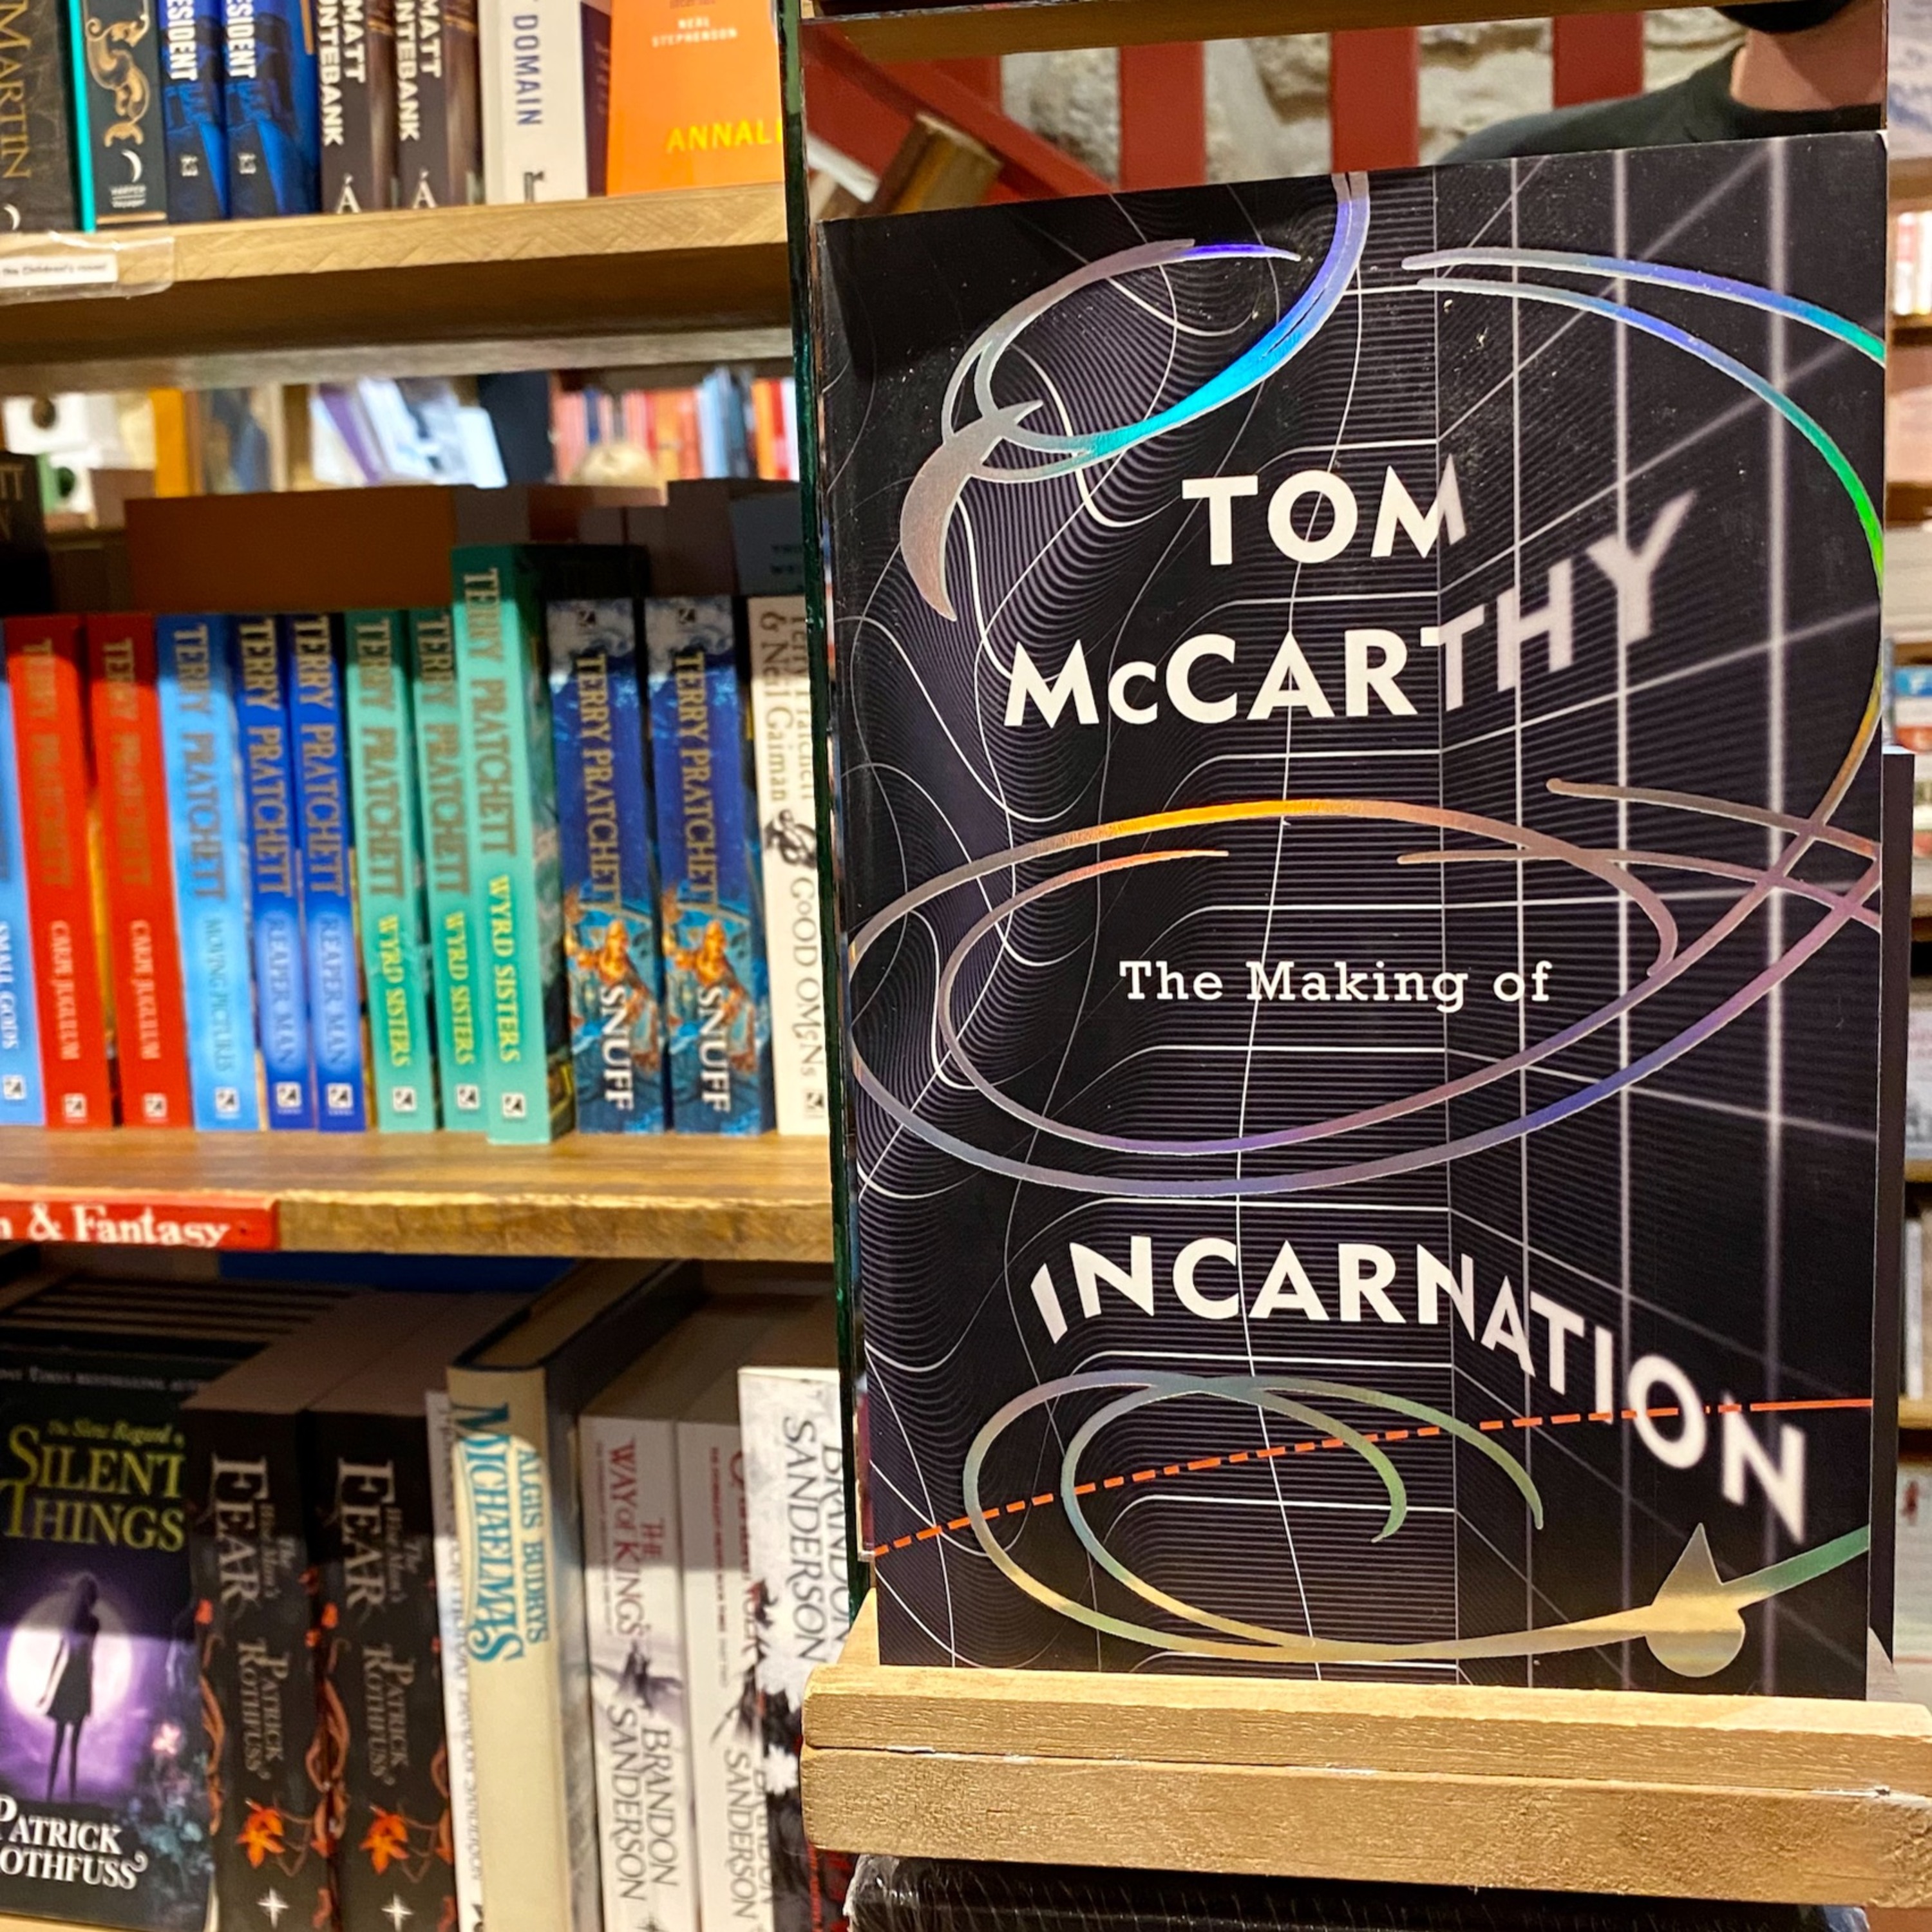 Tom McCarthy on The Making of Incarnation